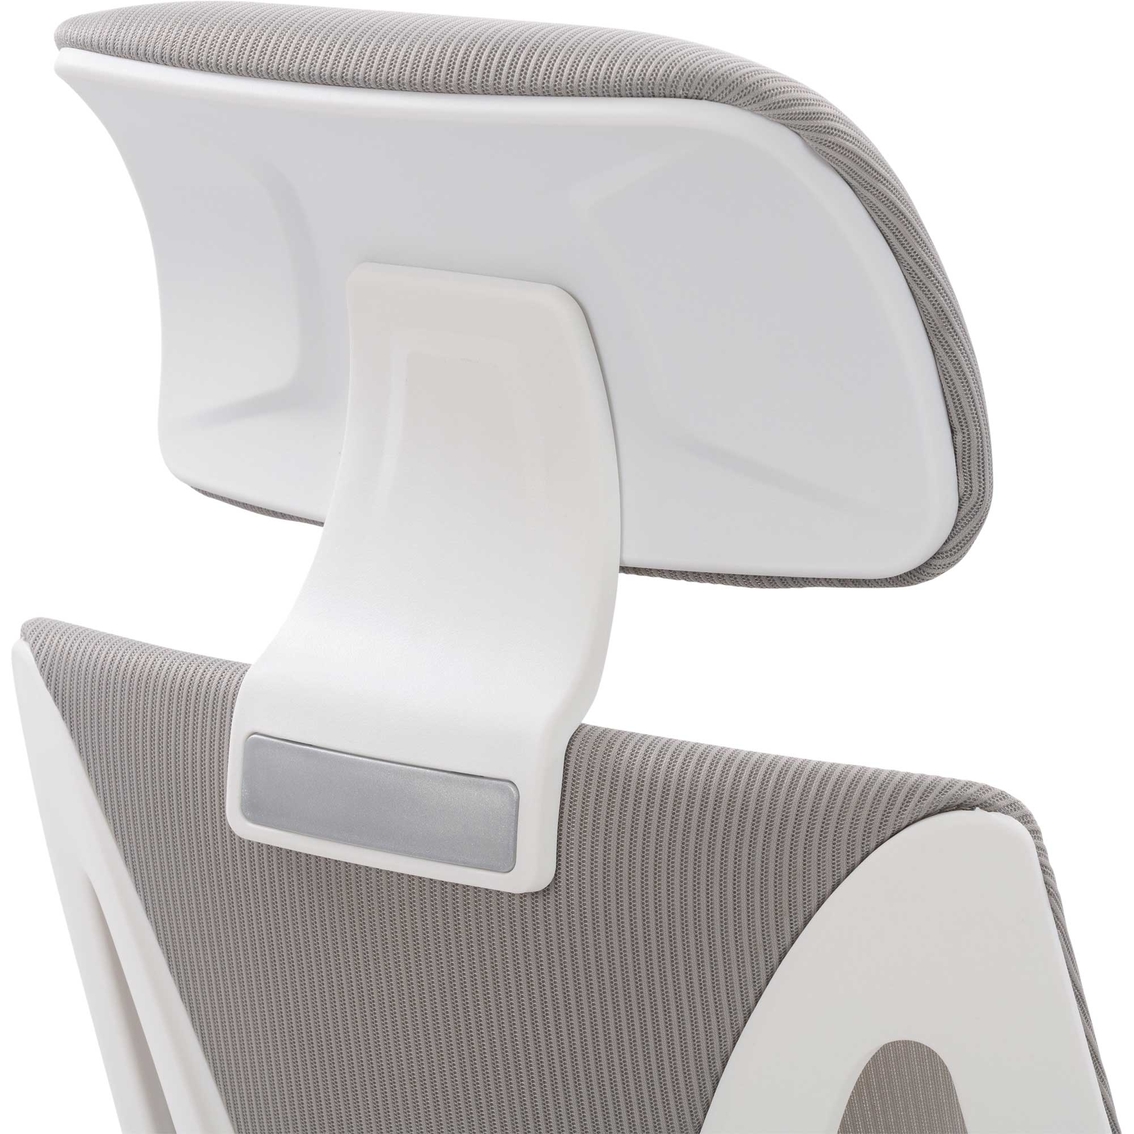 CorLiving Workspace Mesh Back Office Chair - Image 5 of 7